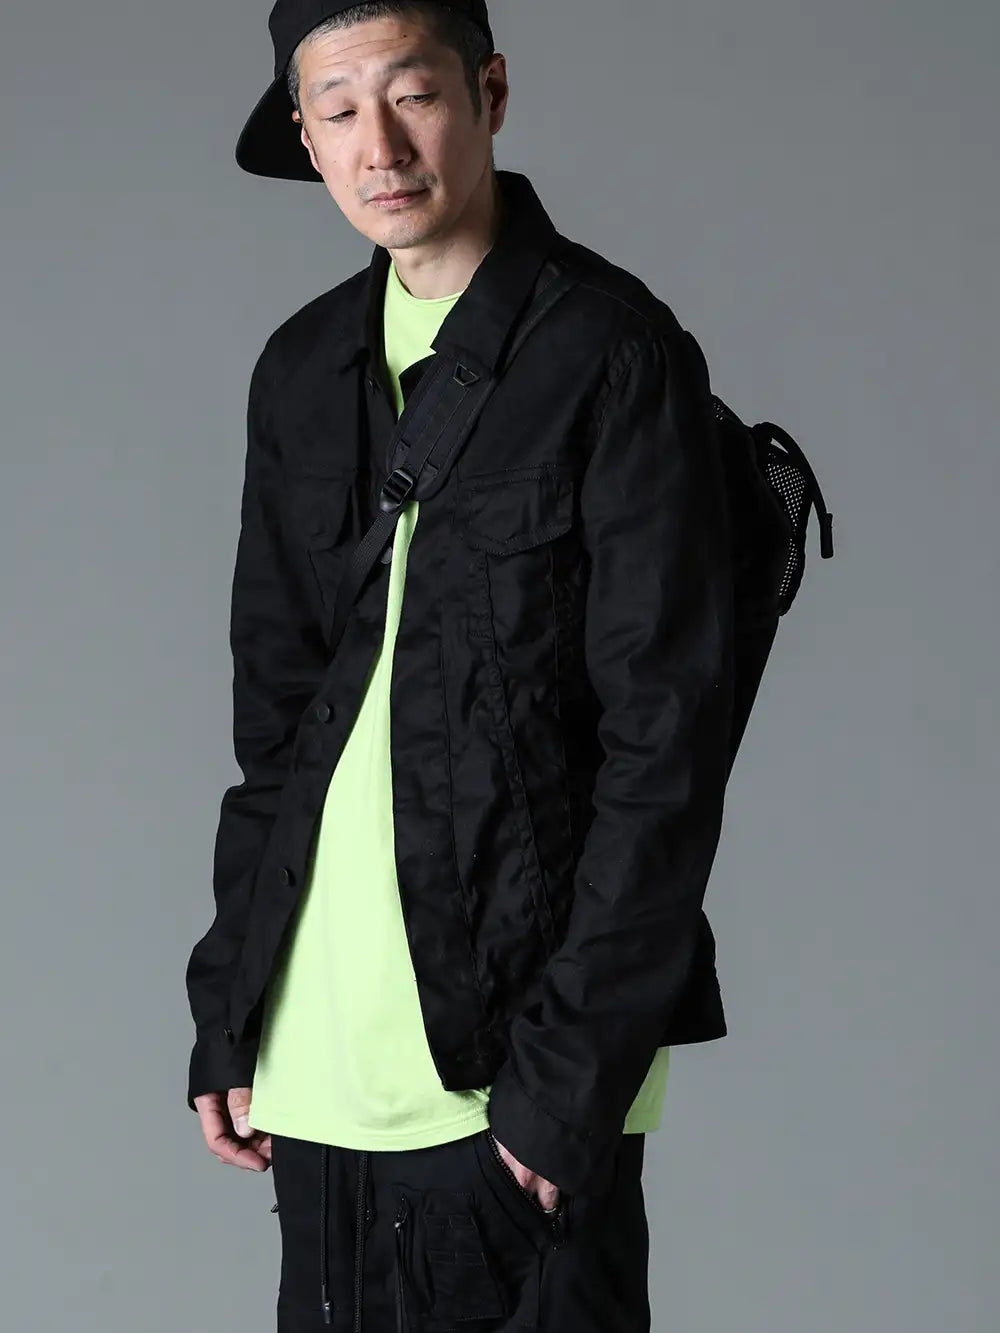 RIPVANWINKLE 24SS  - Jacket with no unnecessary elements - RW-628 (G-Jumper) - RW-631-Lime (Dolman-T Lime) 2 2-001